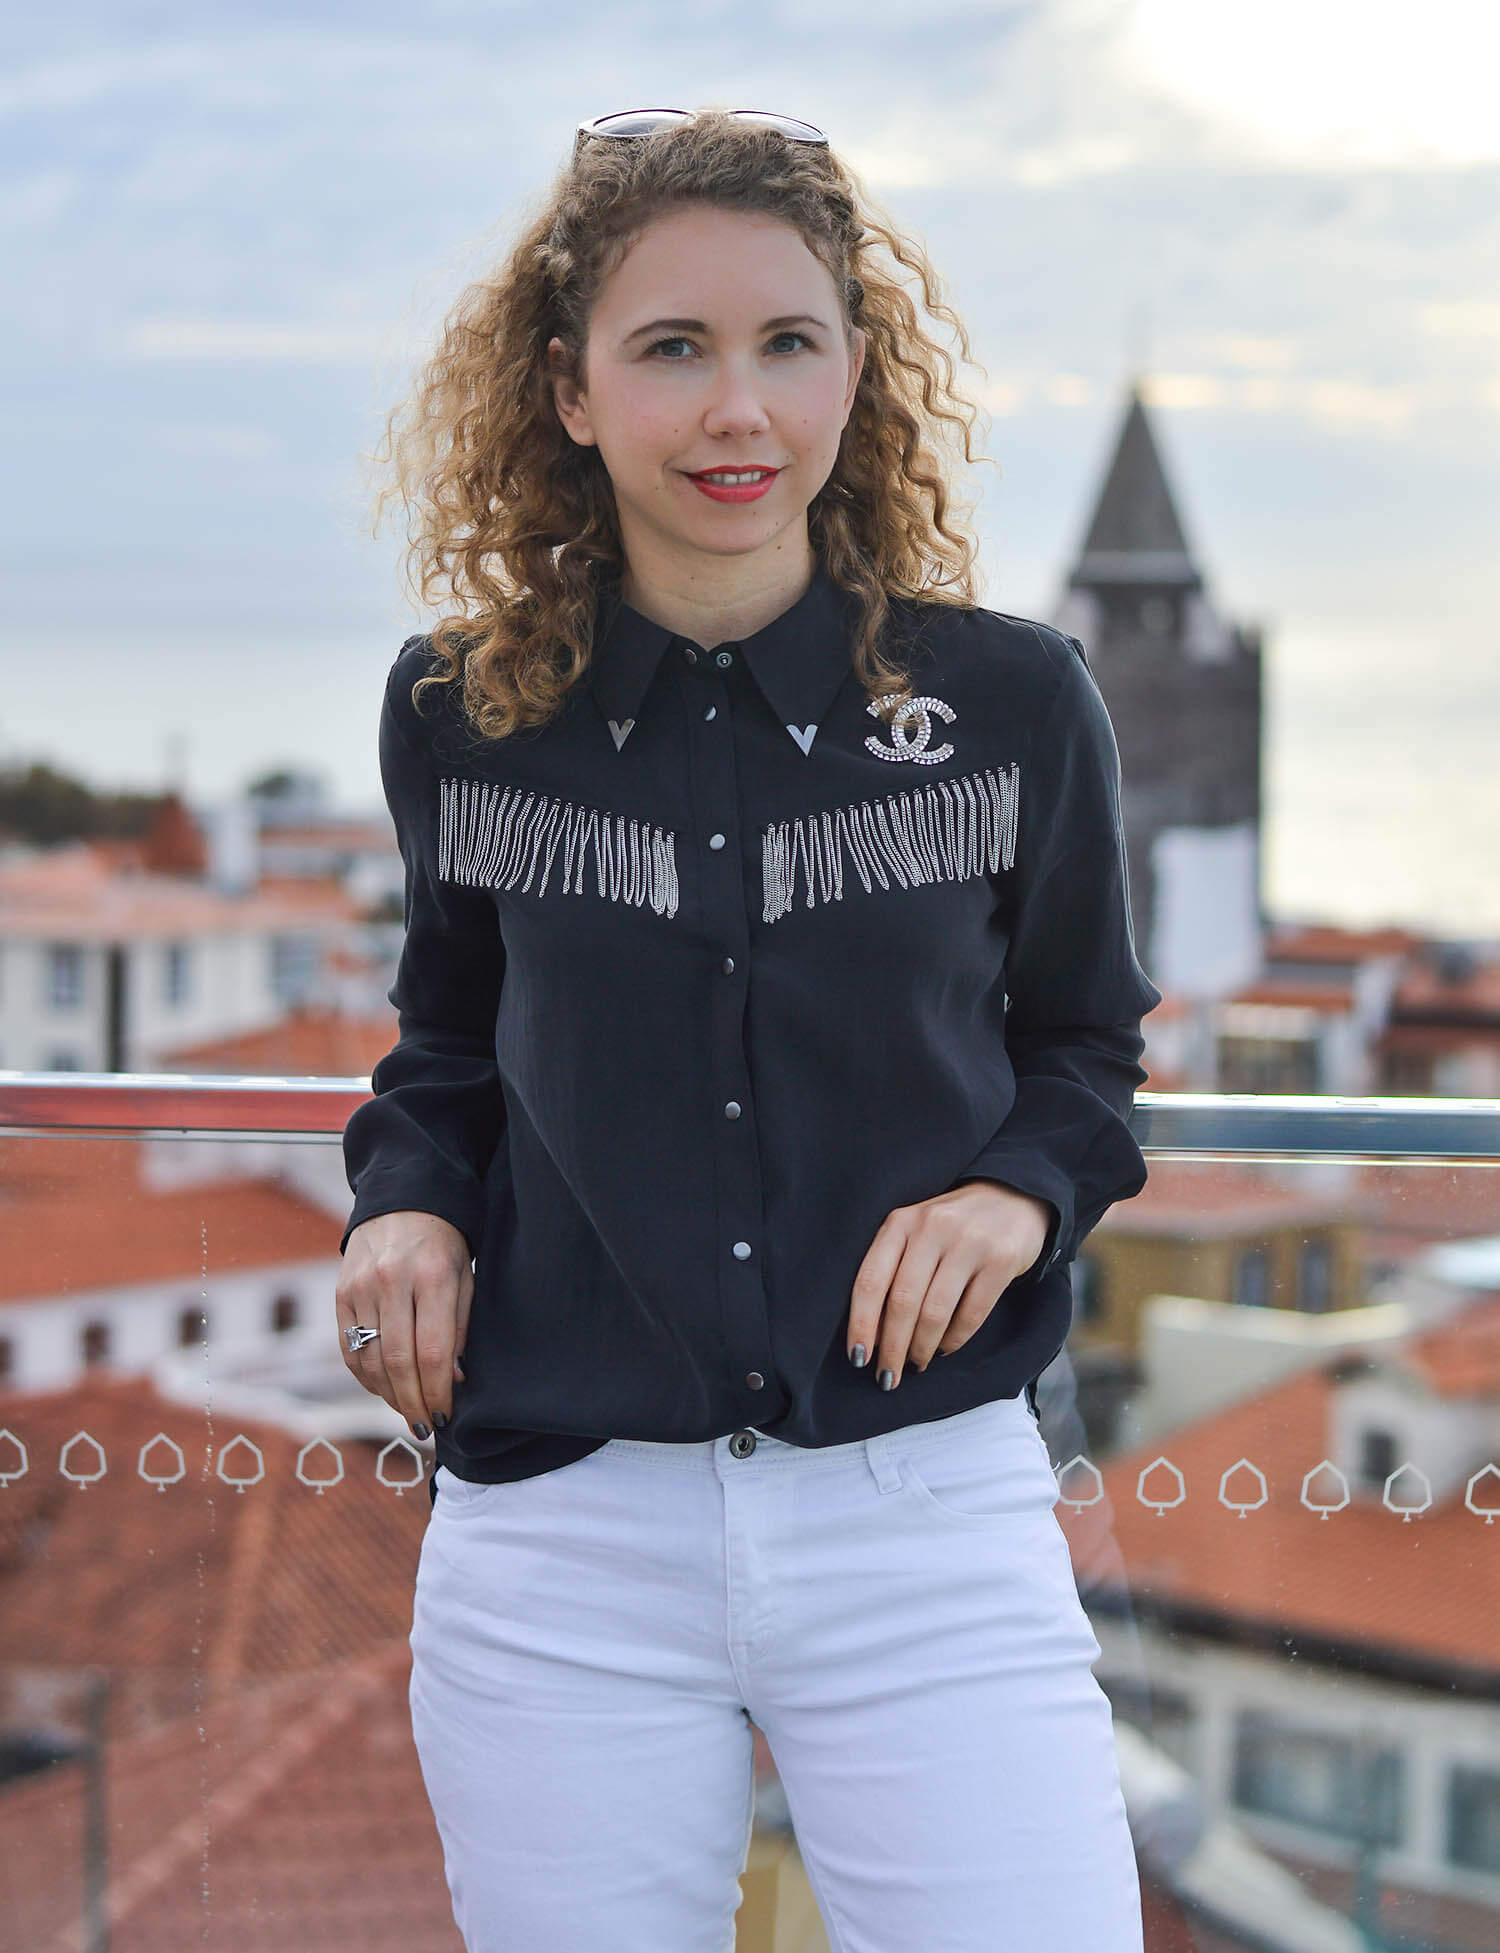 Kationette-fashionblogger-nrw-Outfit-White-Bermudas-Zara-Western-Blouse-and-Velvet-Sneakers-in-Funchal-Madeira